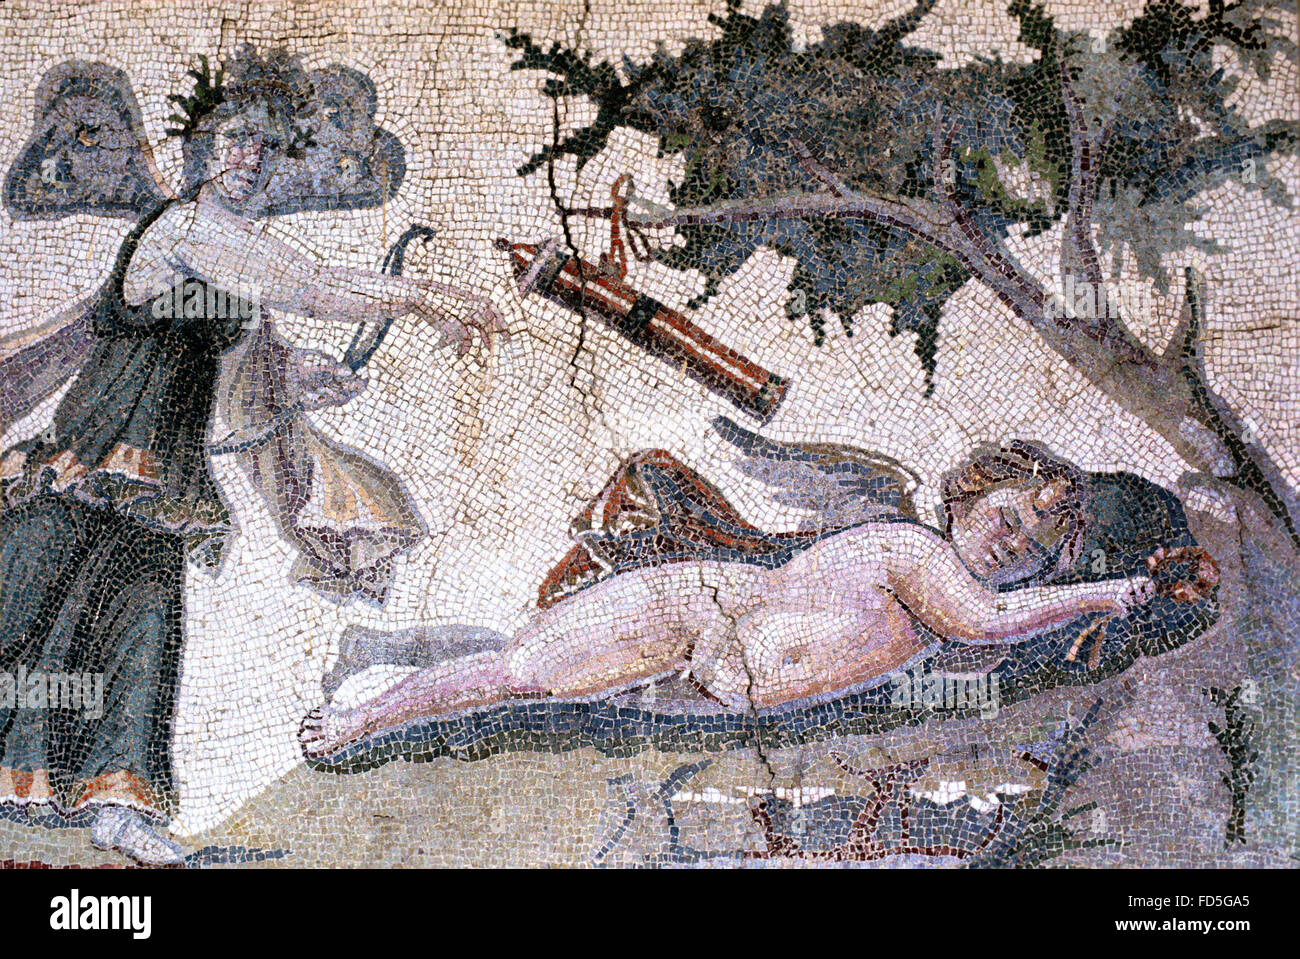 Eros, the Greek God of Love (or Roman Cupid) and Psyche a mortal Woman in Greek Mythology who became Eros' Wife. Roman Floor Mosaic (c3rd AD) from Samandag, Hatay, Turkey. The Mosaic is on Display in the Hatay Archaeology Museum in Antakya Stock Photo